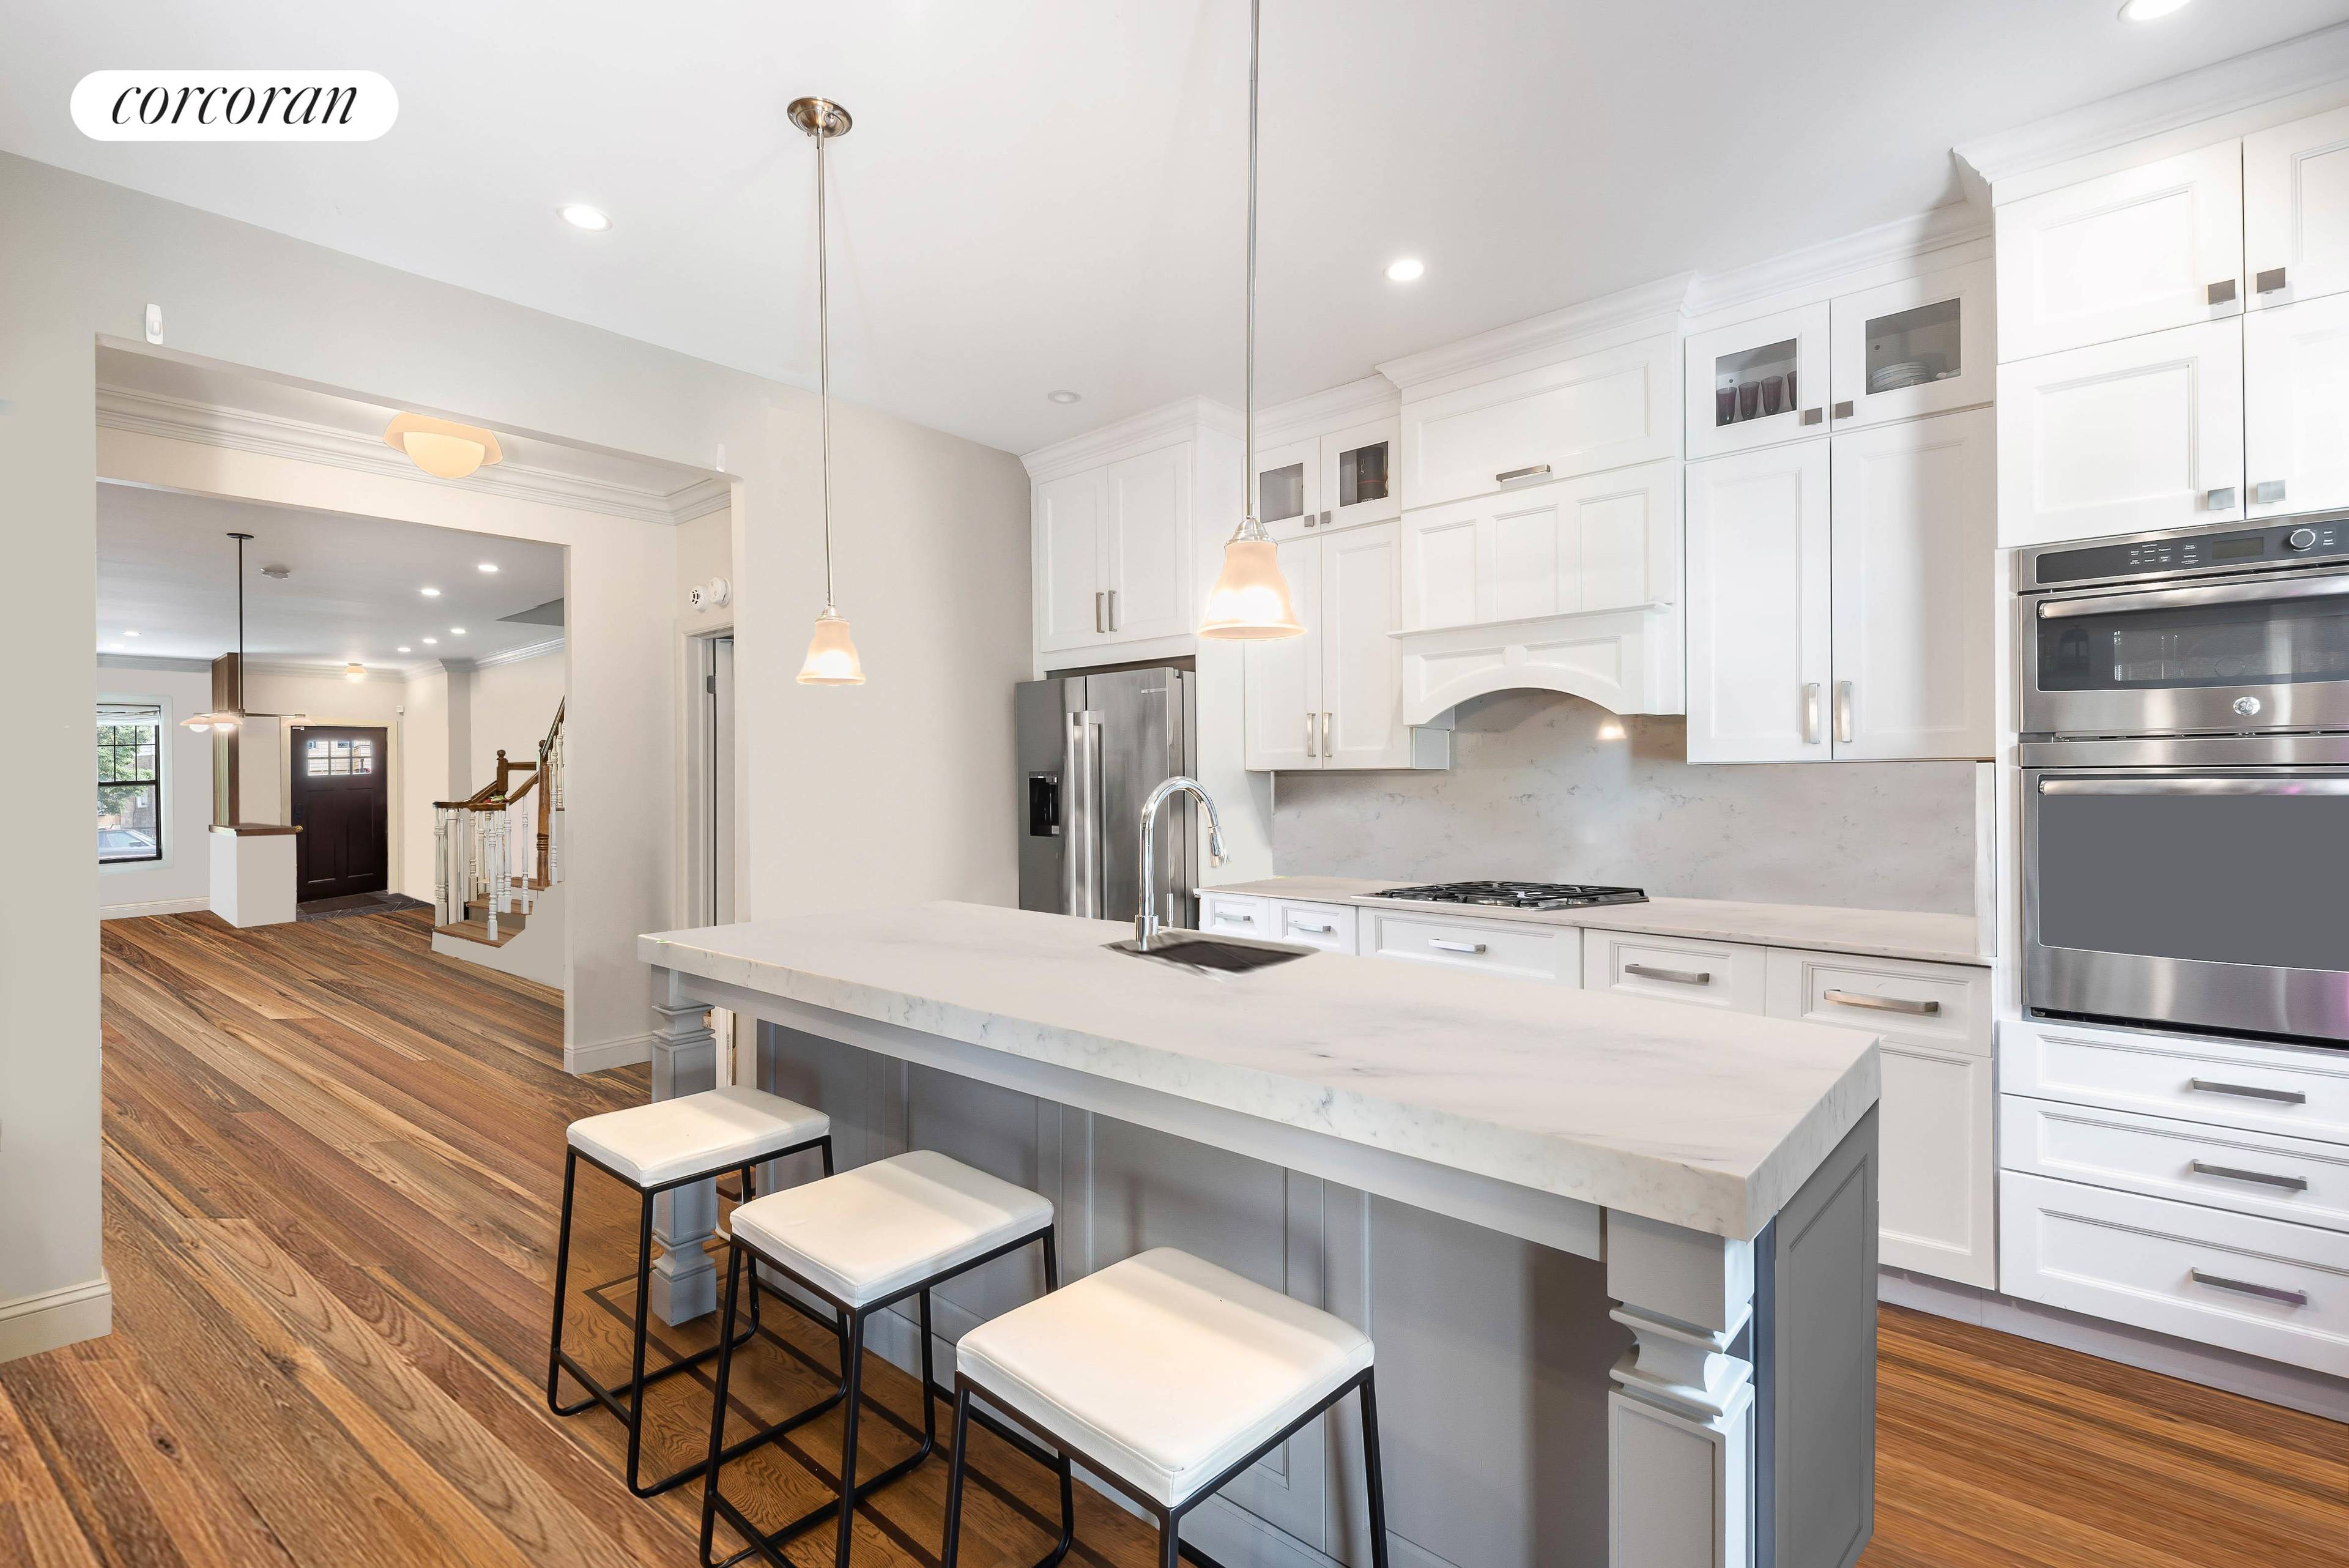 399 Fenimore is a stylish single family home with 3 bedrooms, two full and two half bathrooms, two large rooms in the attic, and home office opportunities on every floor.